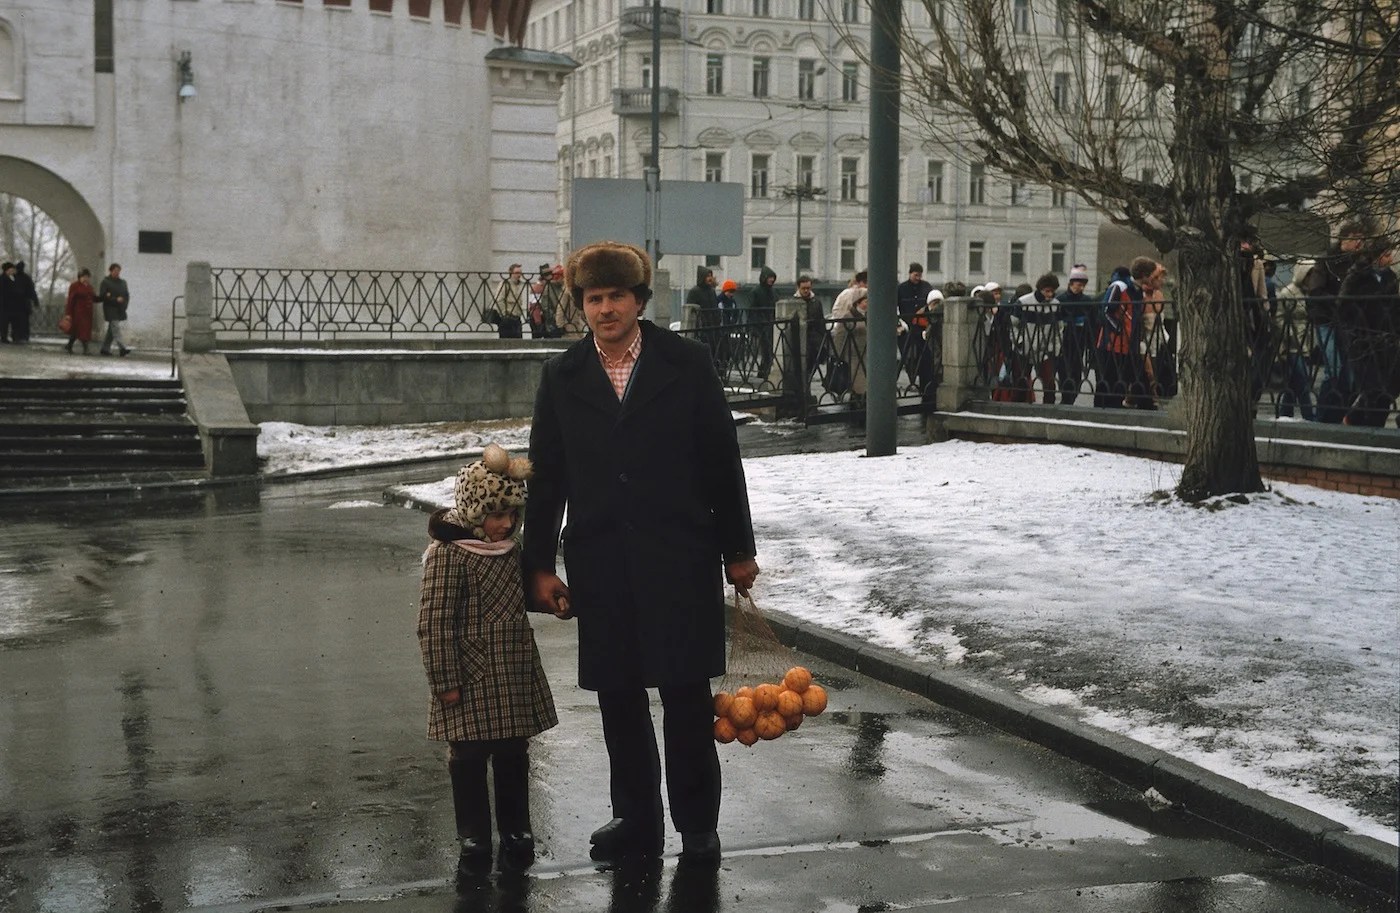 Did the Russians love the '80s too? Some revealing photos